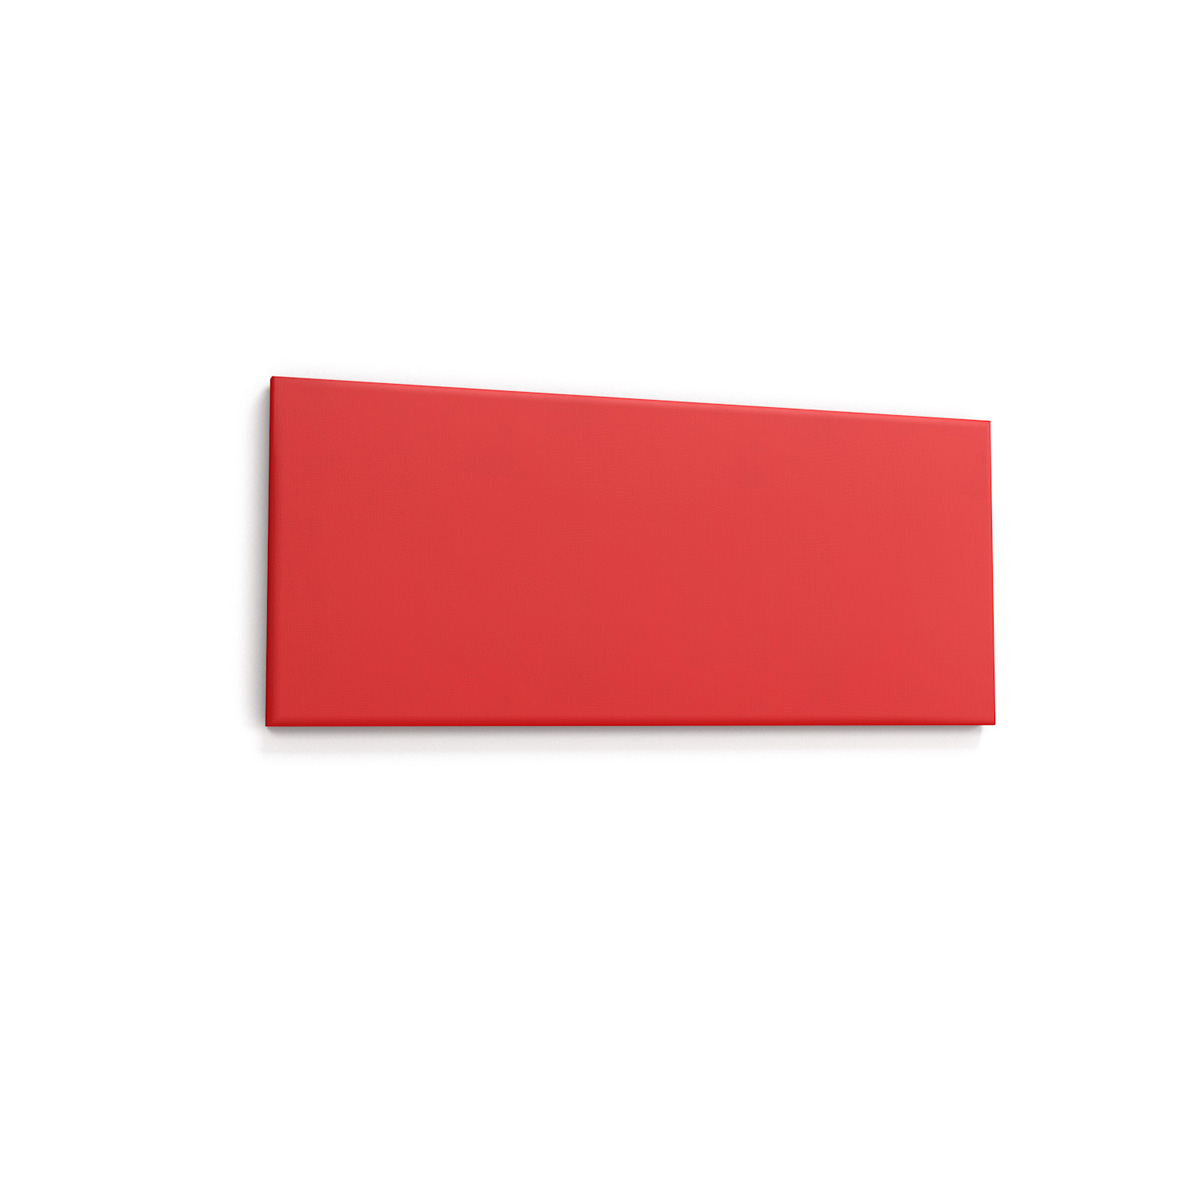 STRATOS™ Acoustic Rectangle Boards 300mm x 700mm